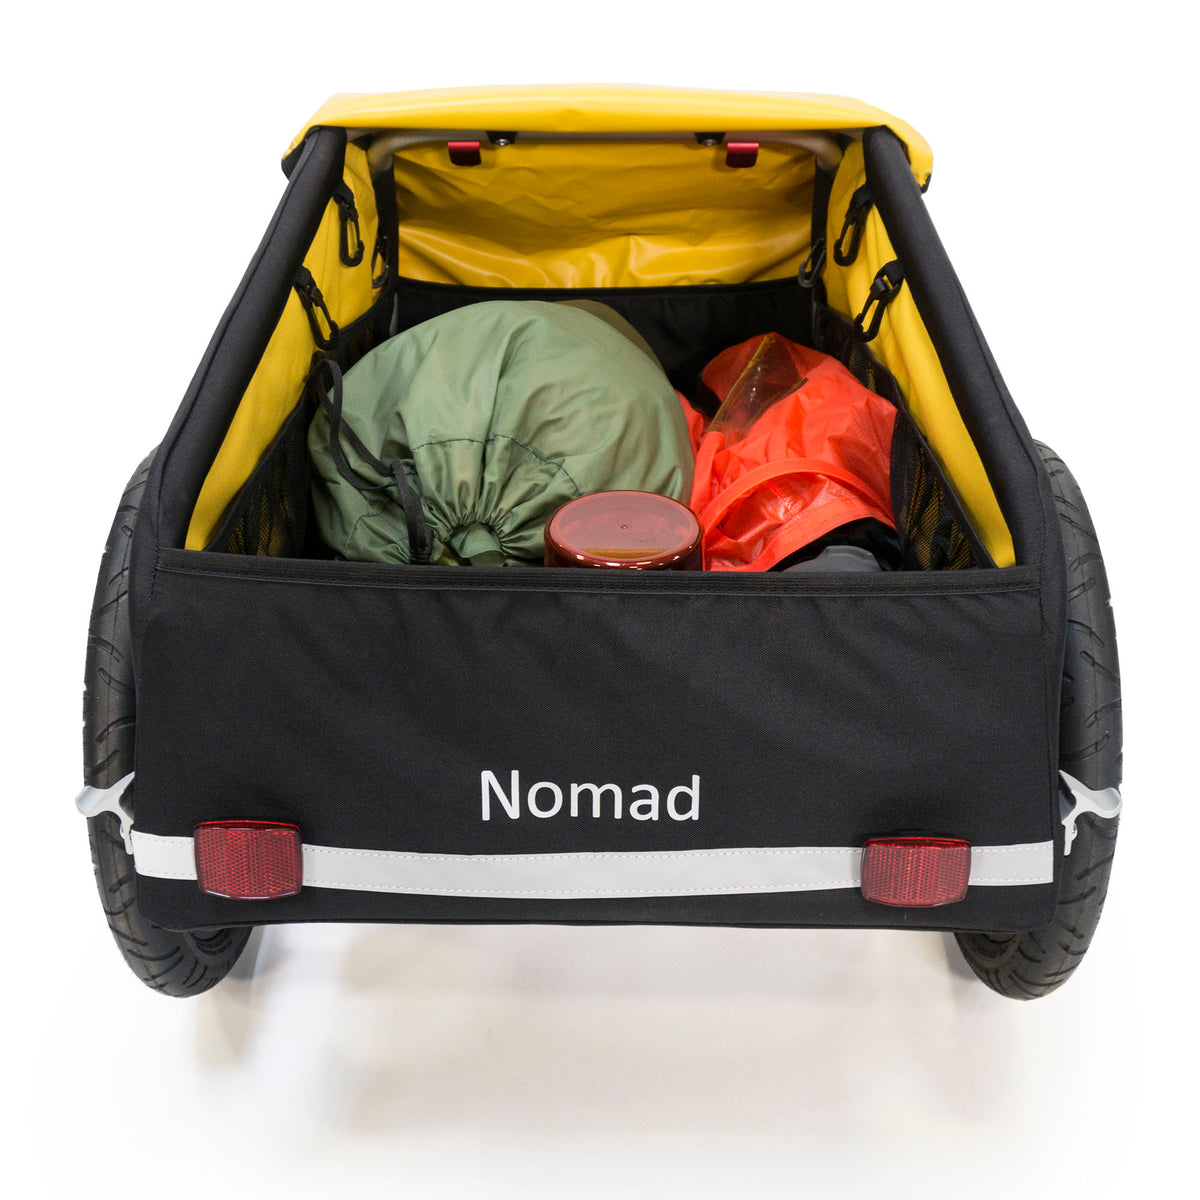 Burley Nomad Trailer Loaded with Cargo